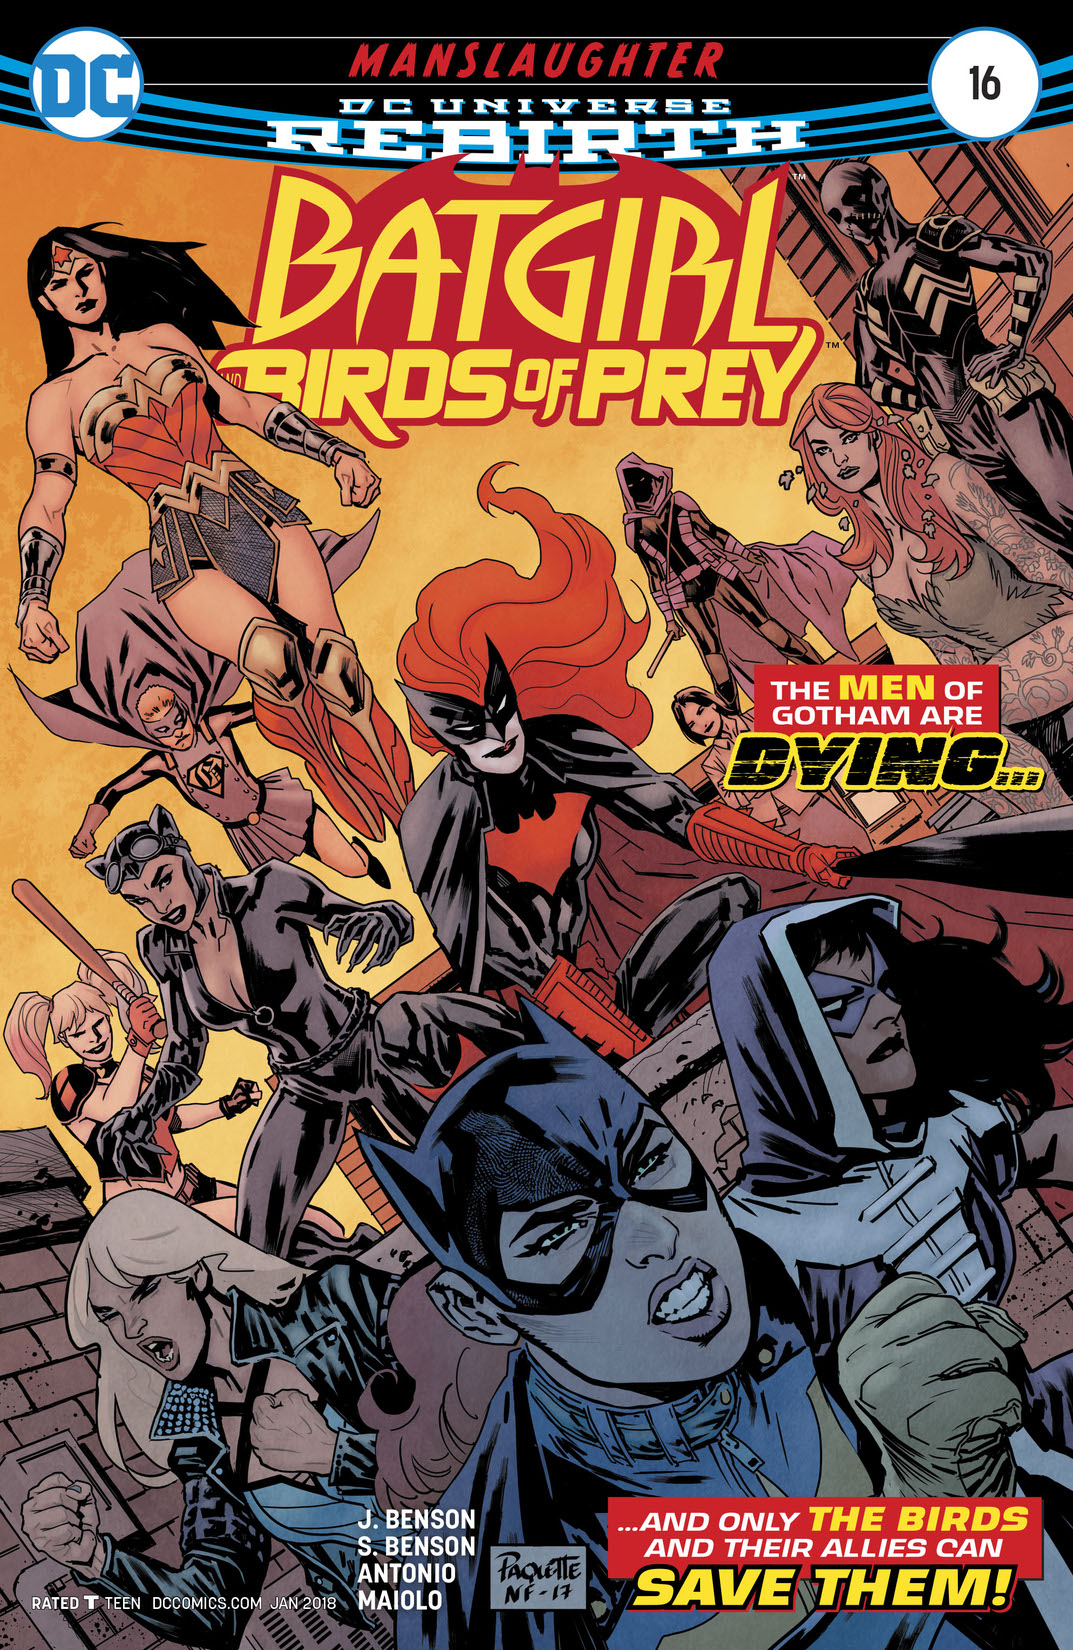 Batgirl and the Birds of Prey #16 preview images